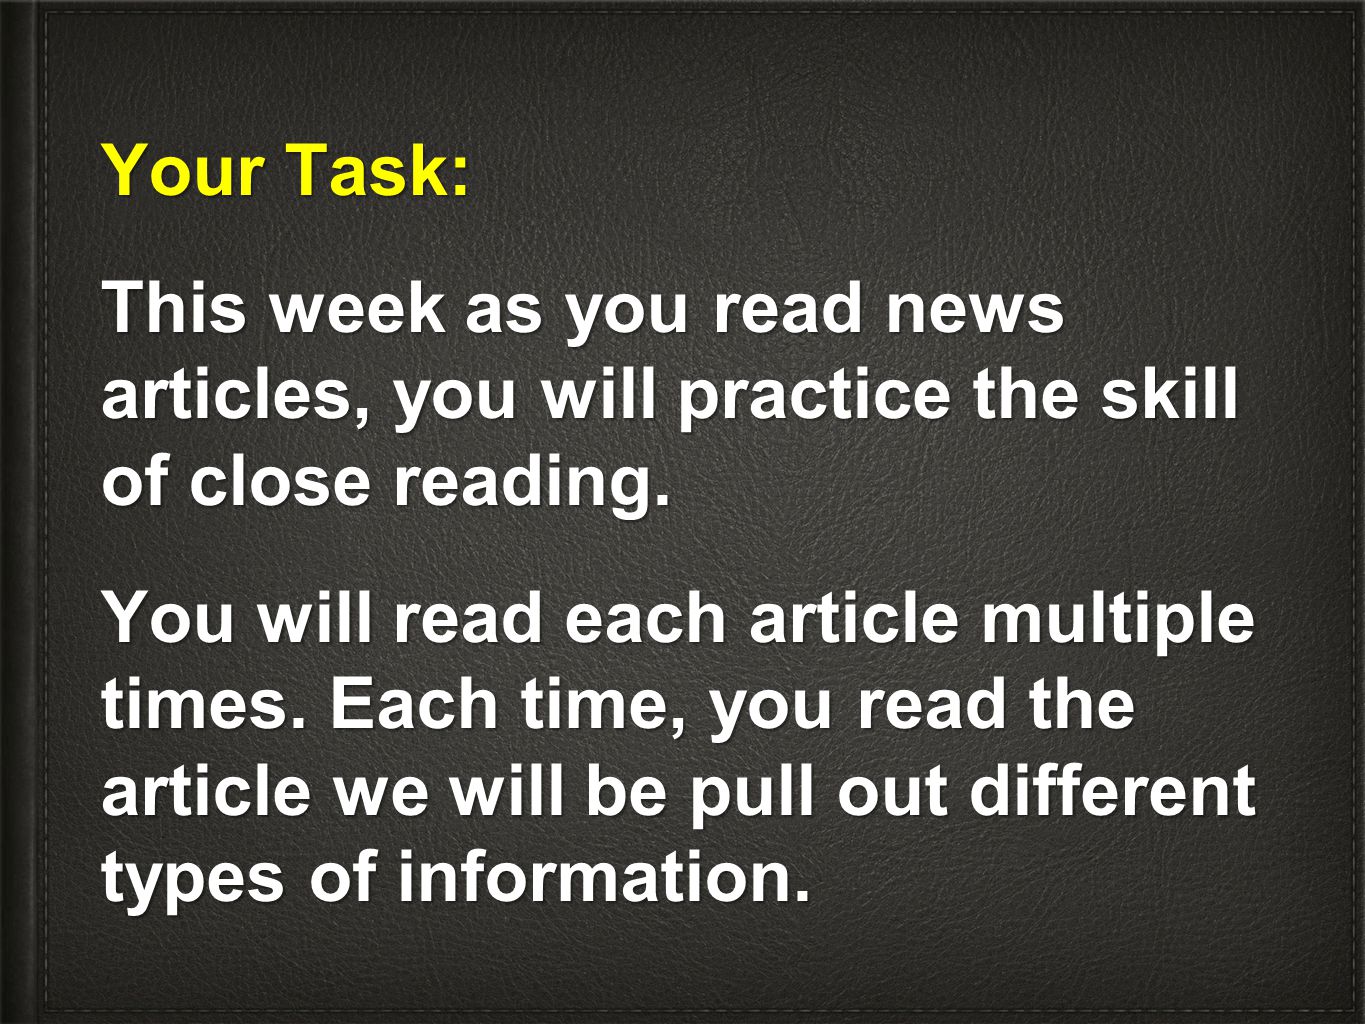 Your Task: This week as you read news articles, you will practice the skill of close reading.